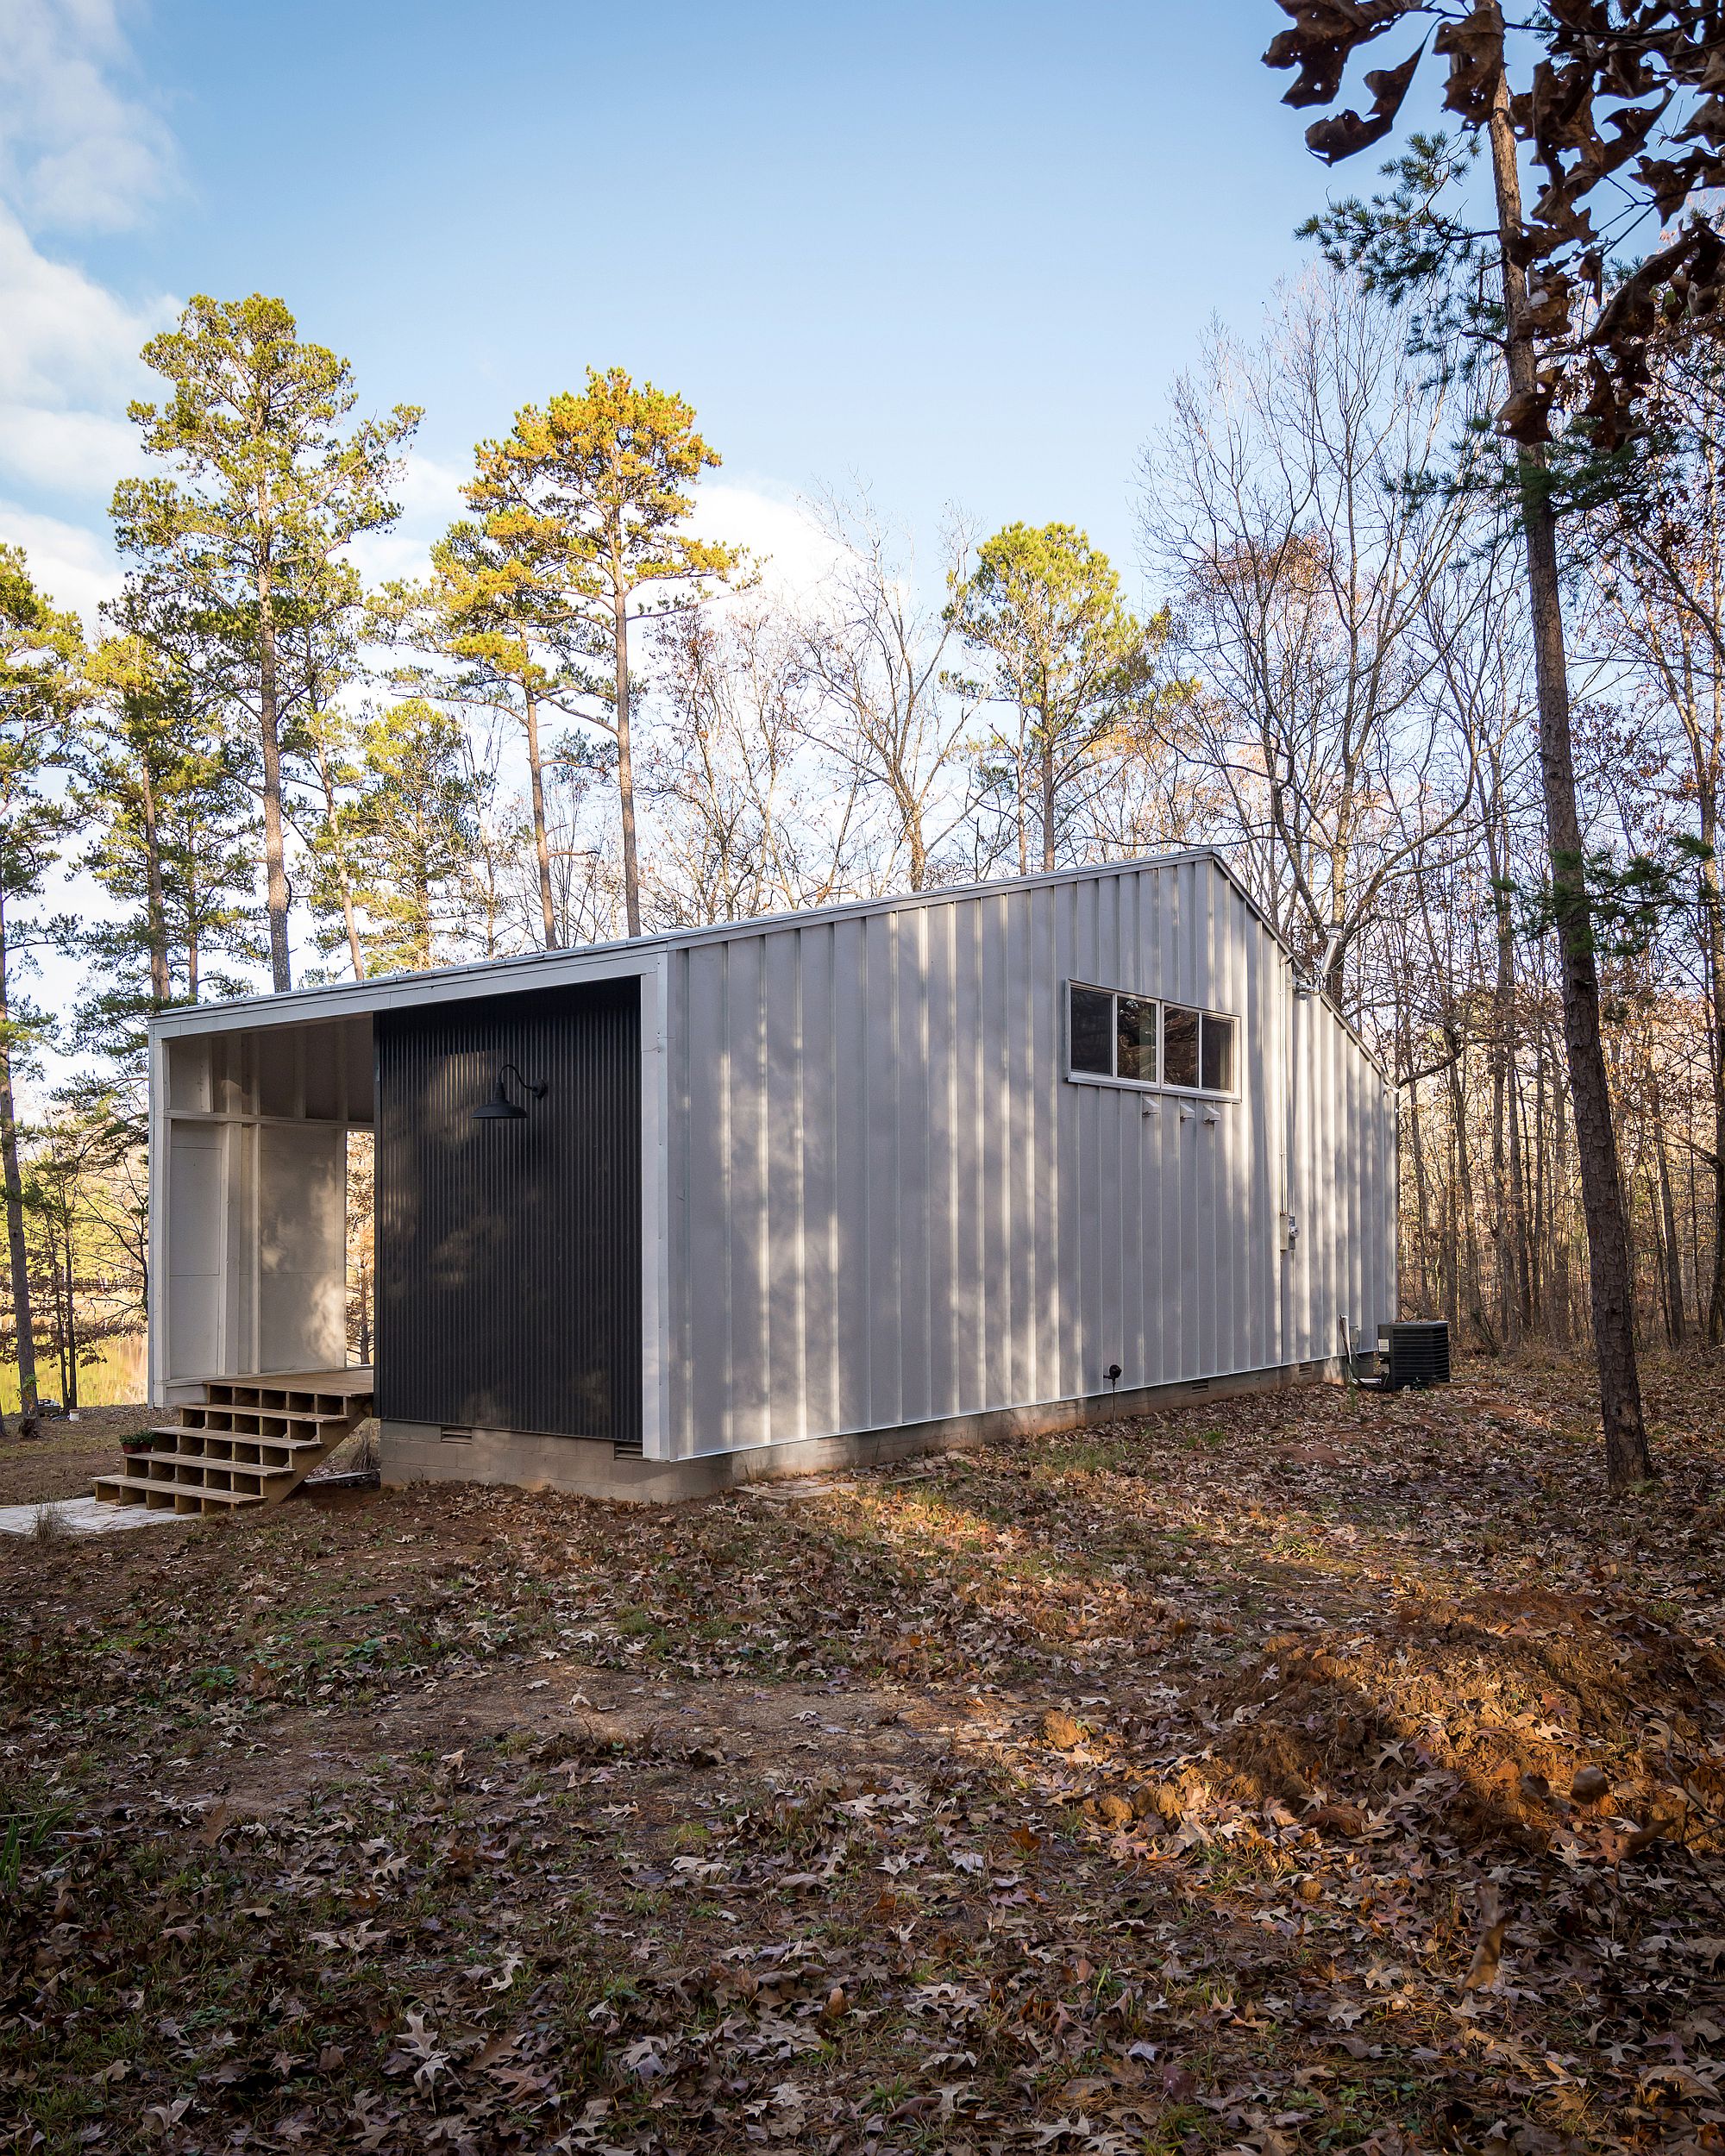 Metal-panels-create-a-cool-cabin-in-the-woods